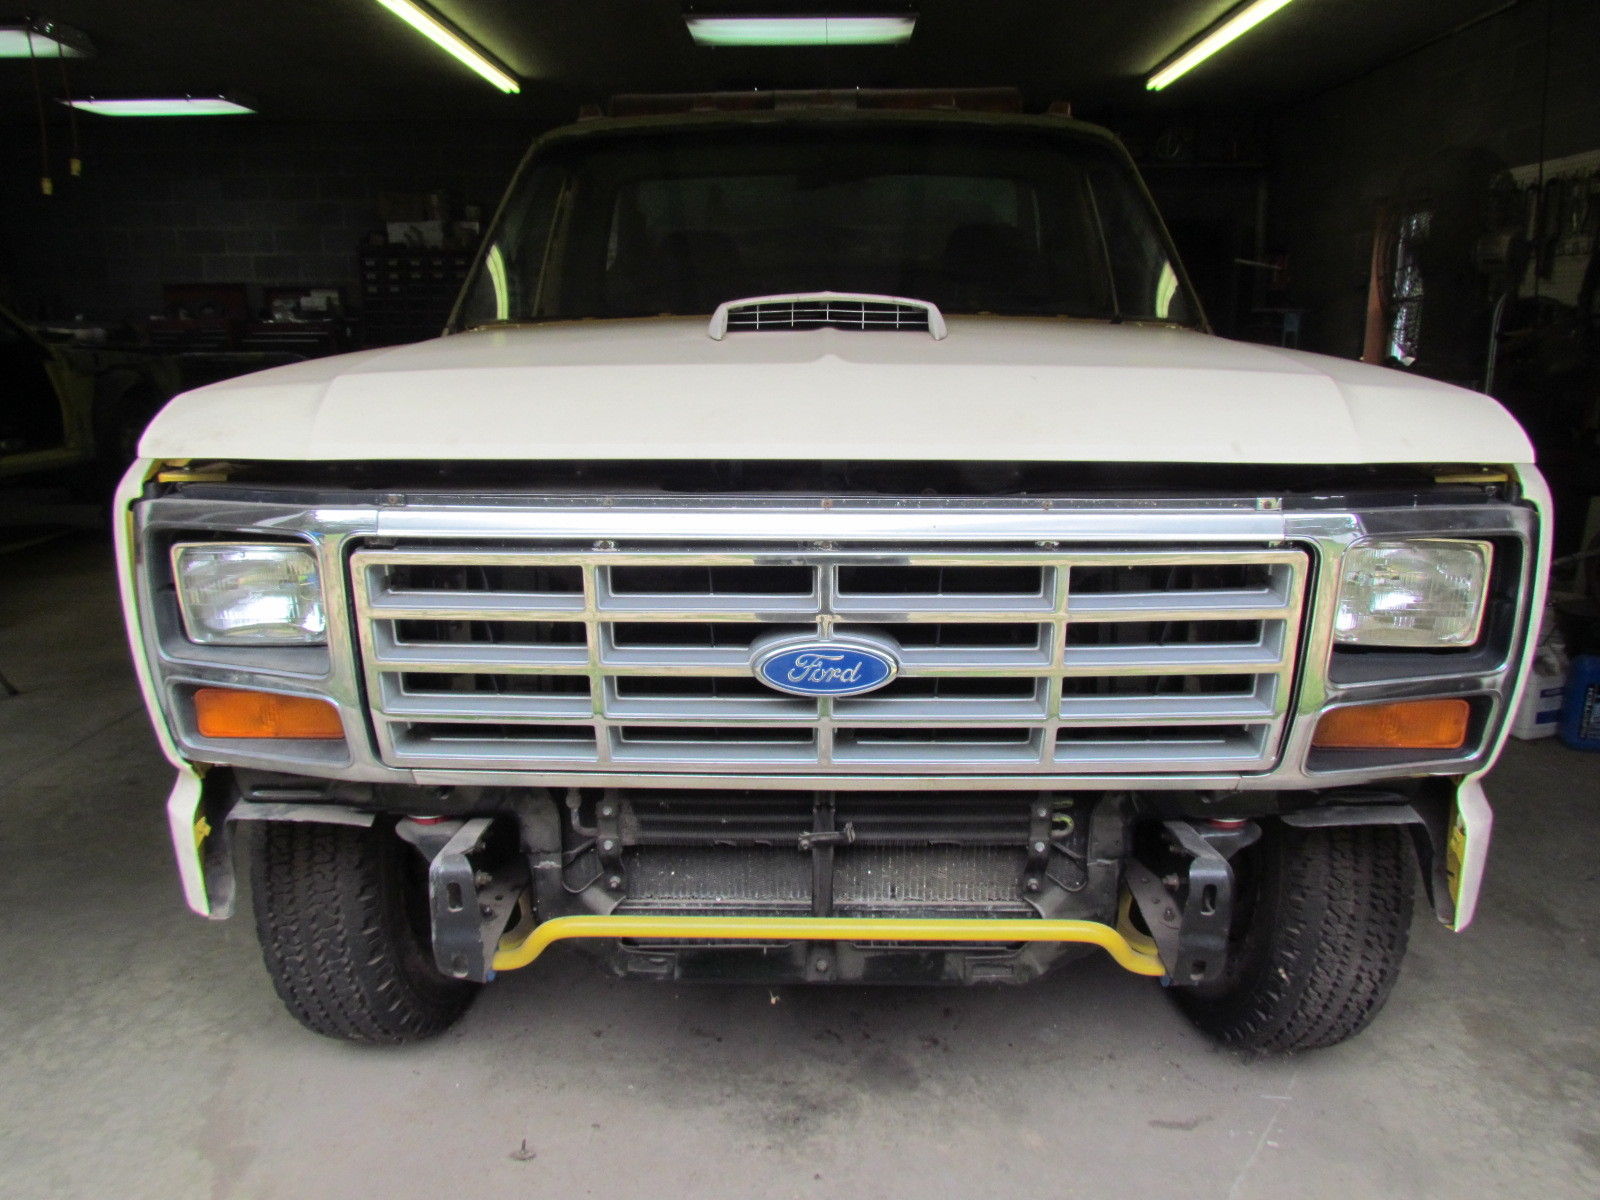 Classic, 1986 Ford F-350 Tow Truck with Wheel Lift...Diesel....Maryland - Classic Ford F-350 ...